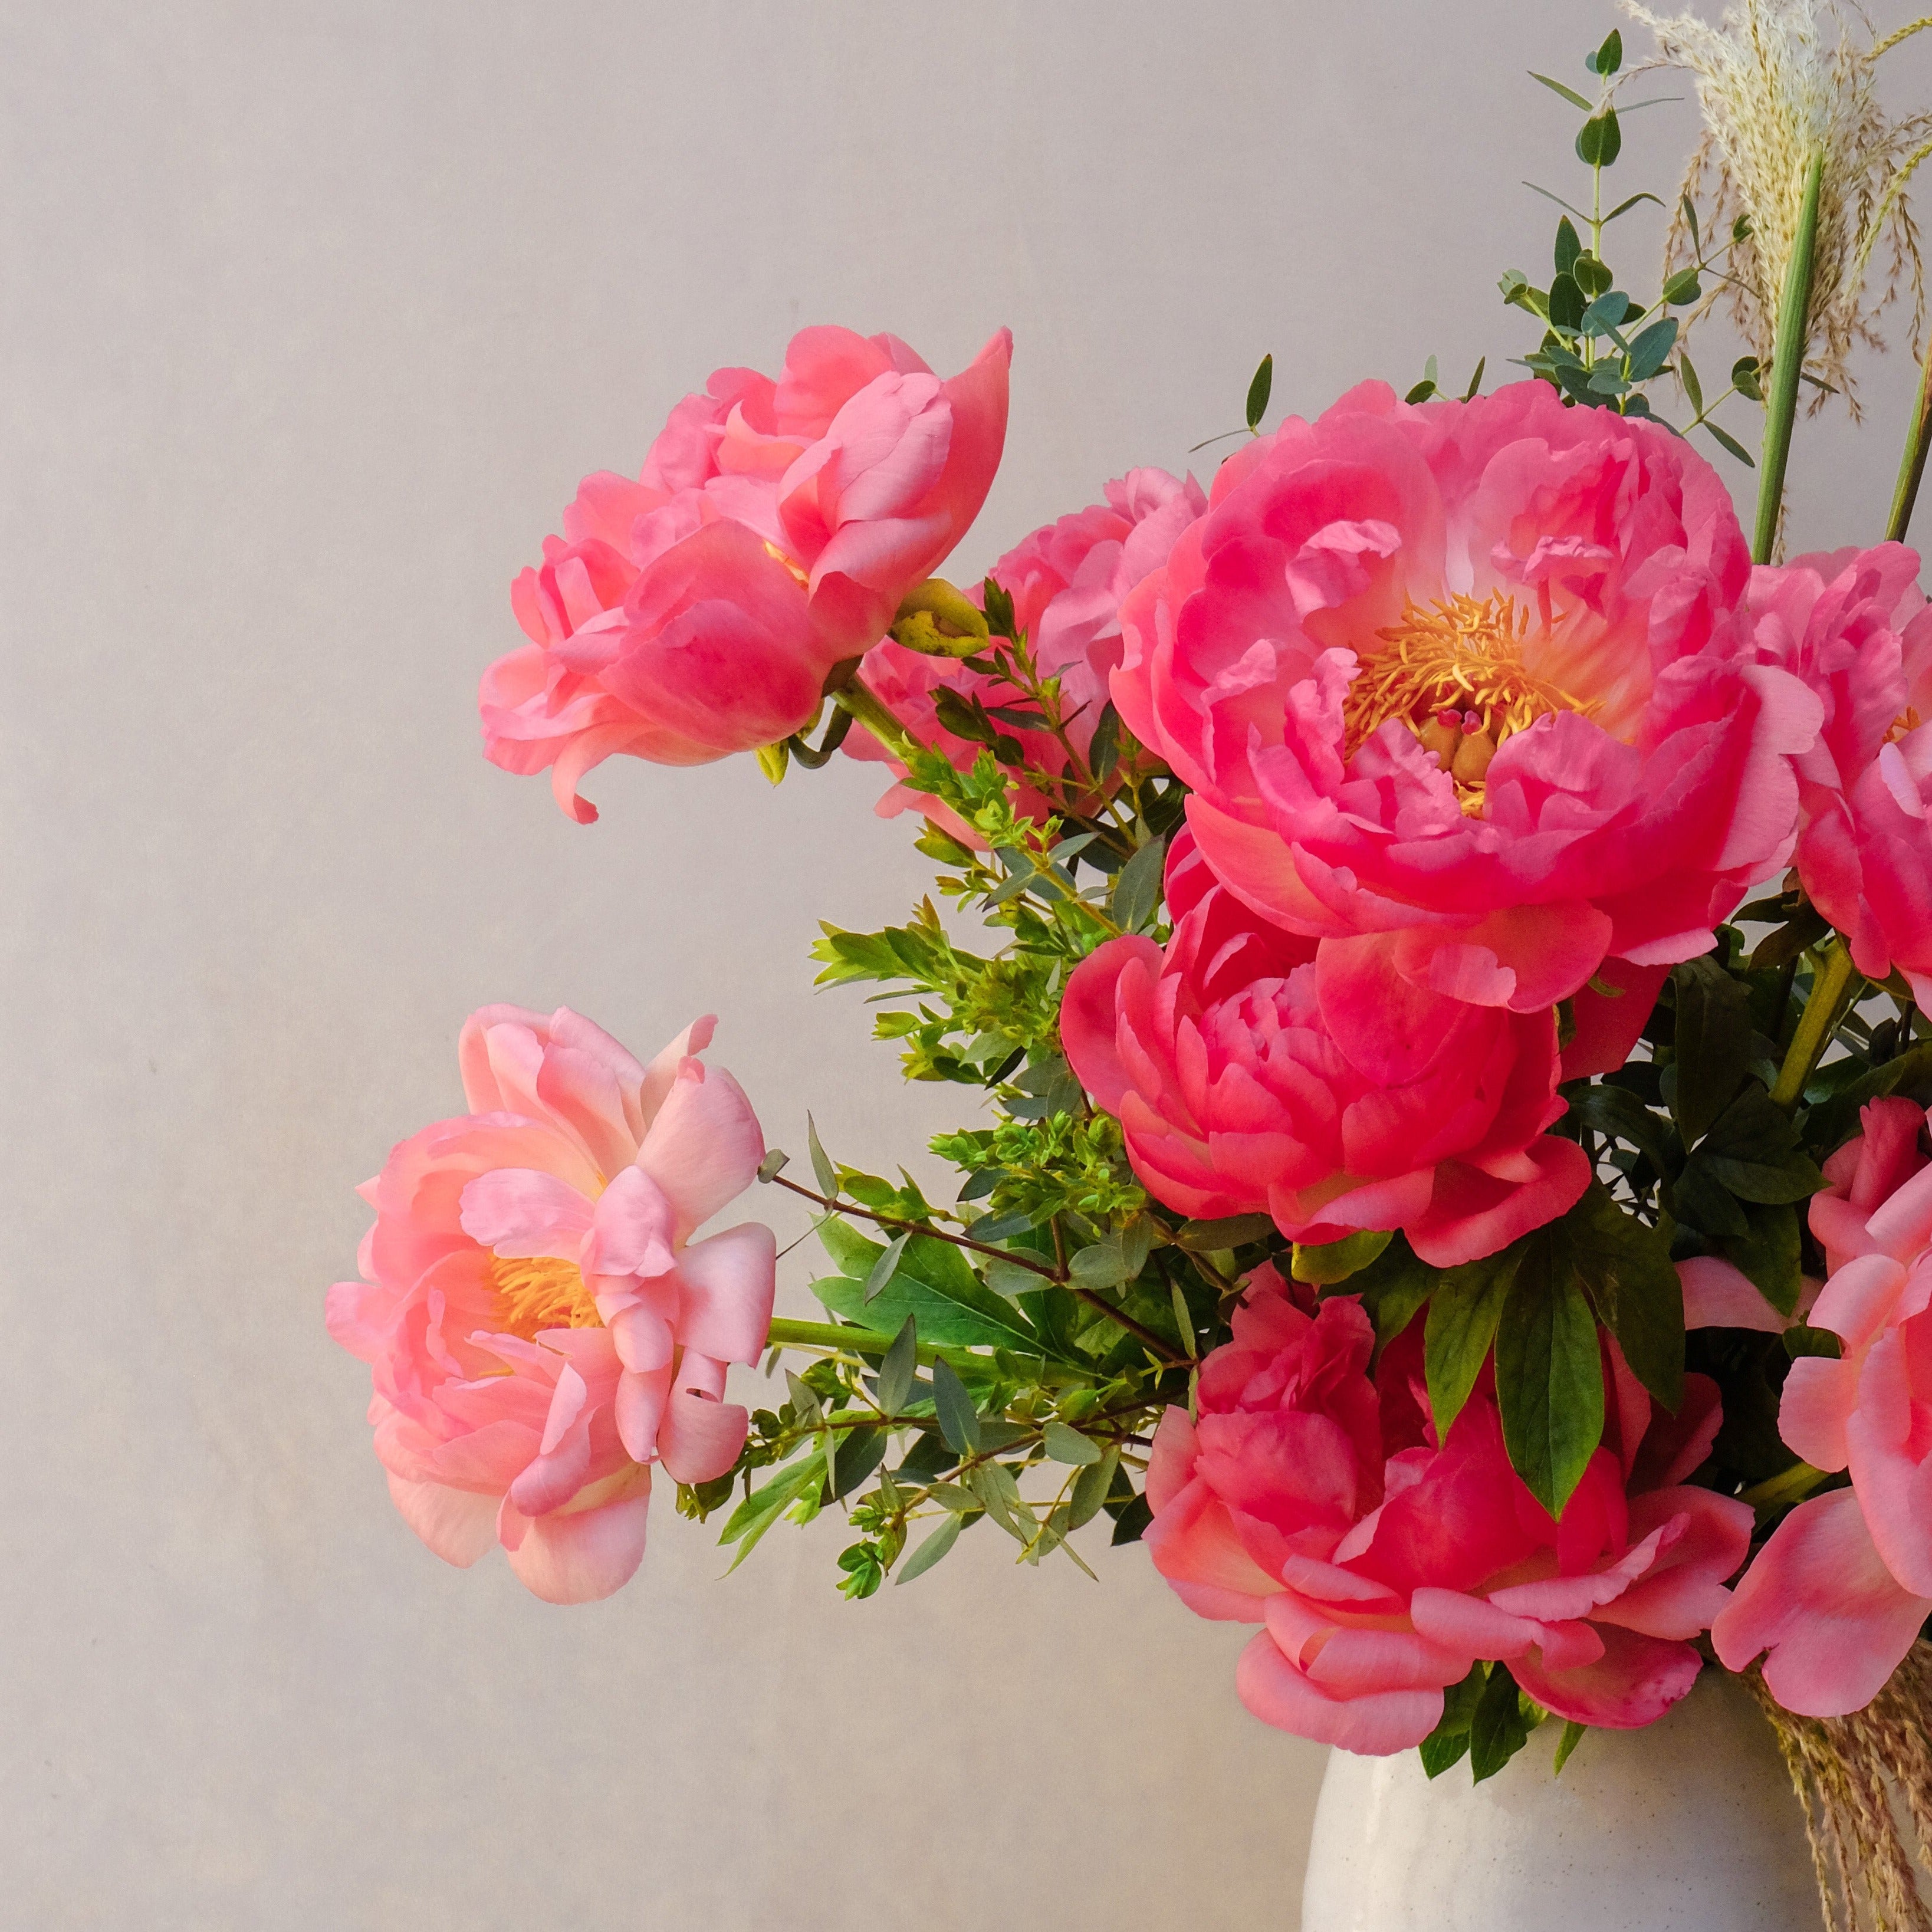 pink peony bouquet to order online from Botanique Workshop London